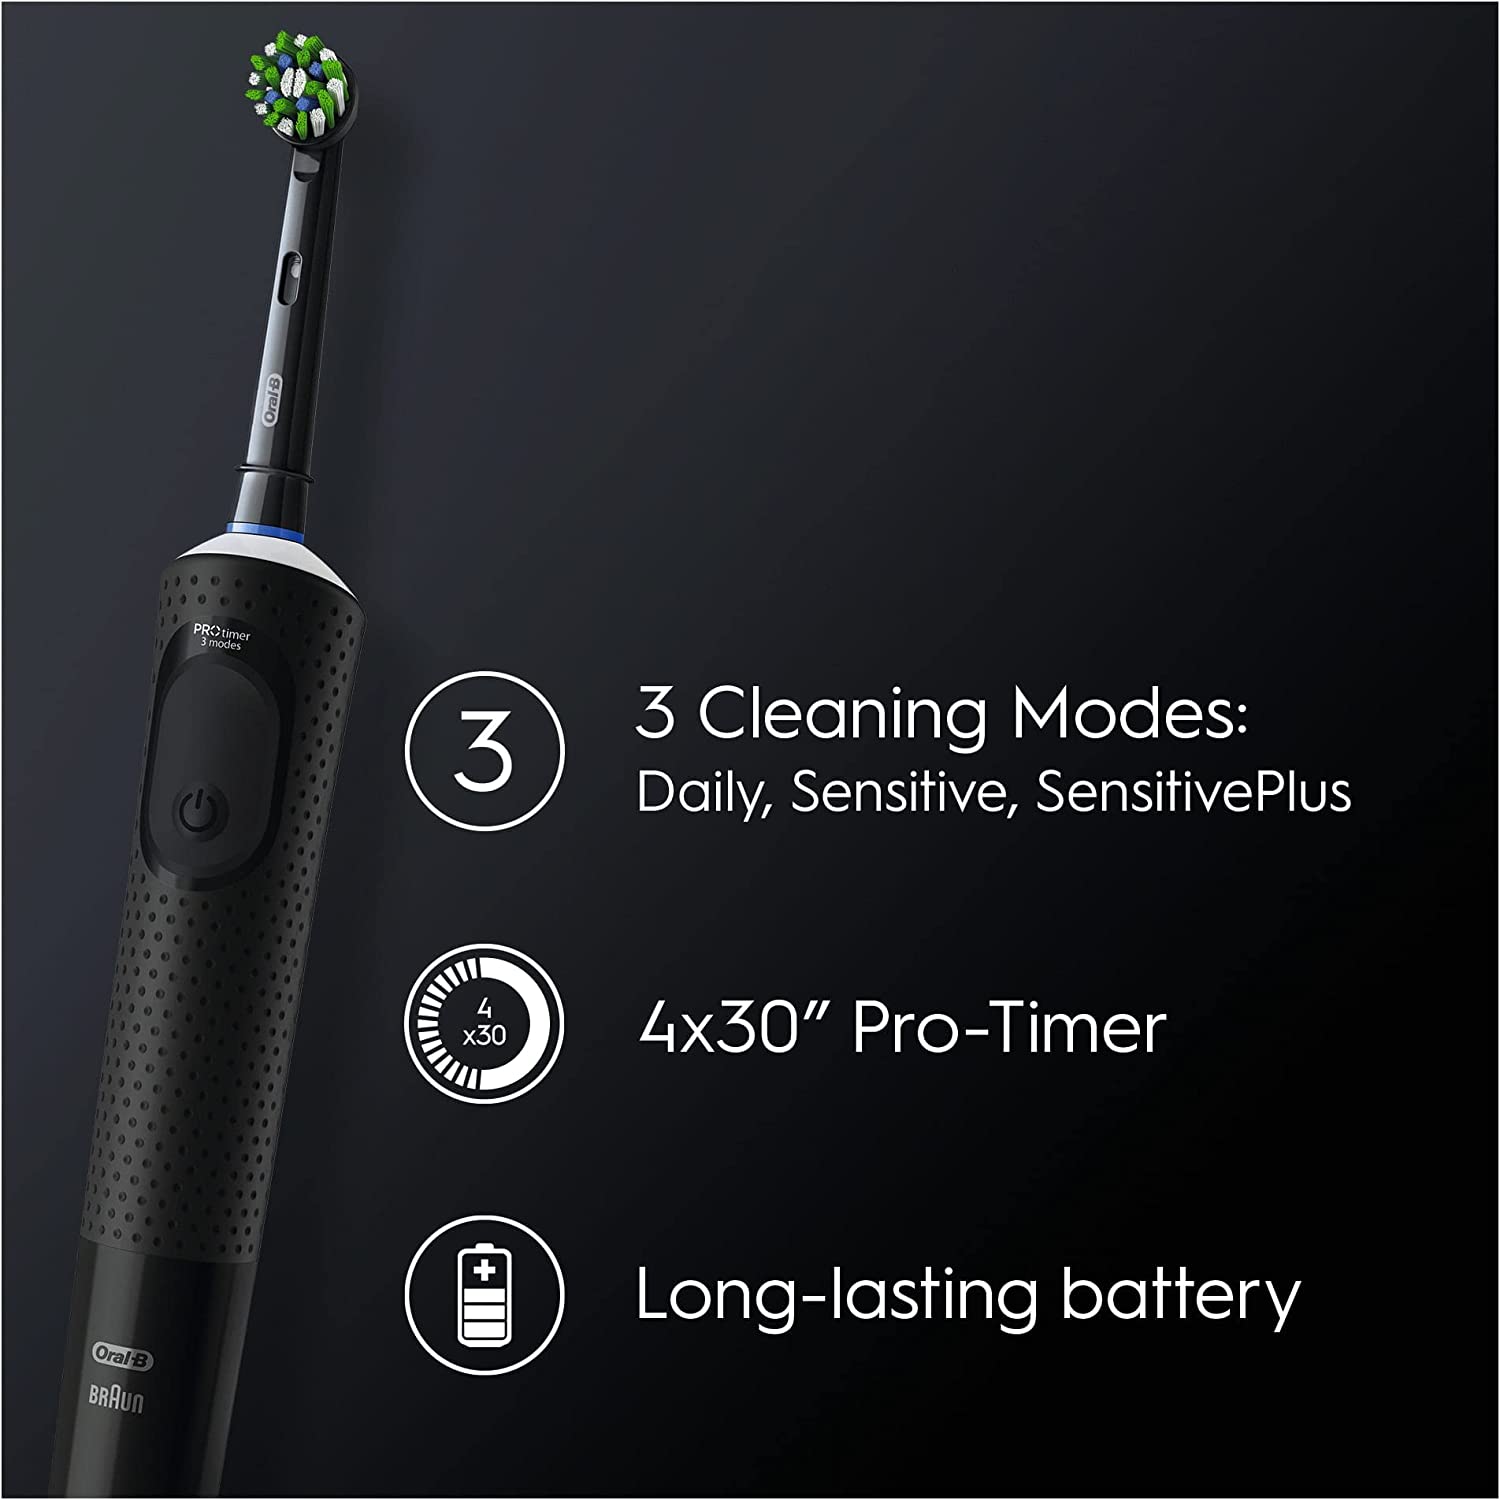 Oral-B Vitality Pro 2 x Electric Toothbrushes, 2 Toothbrush Heads, 3 Brushing Modes Including Sensitive Plus - Black & White - Healthxpress.ie